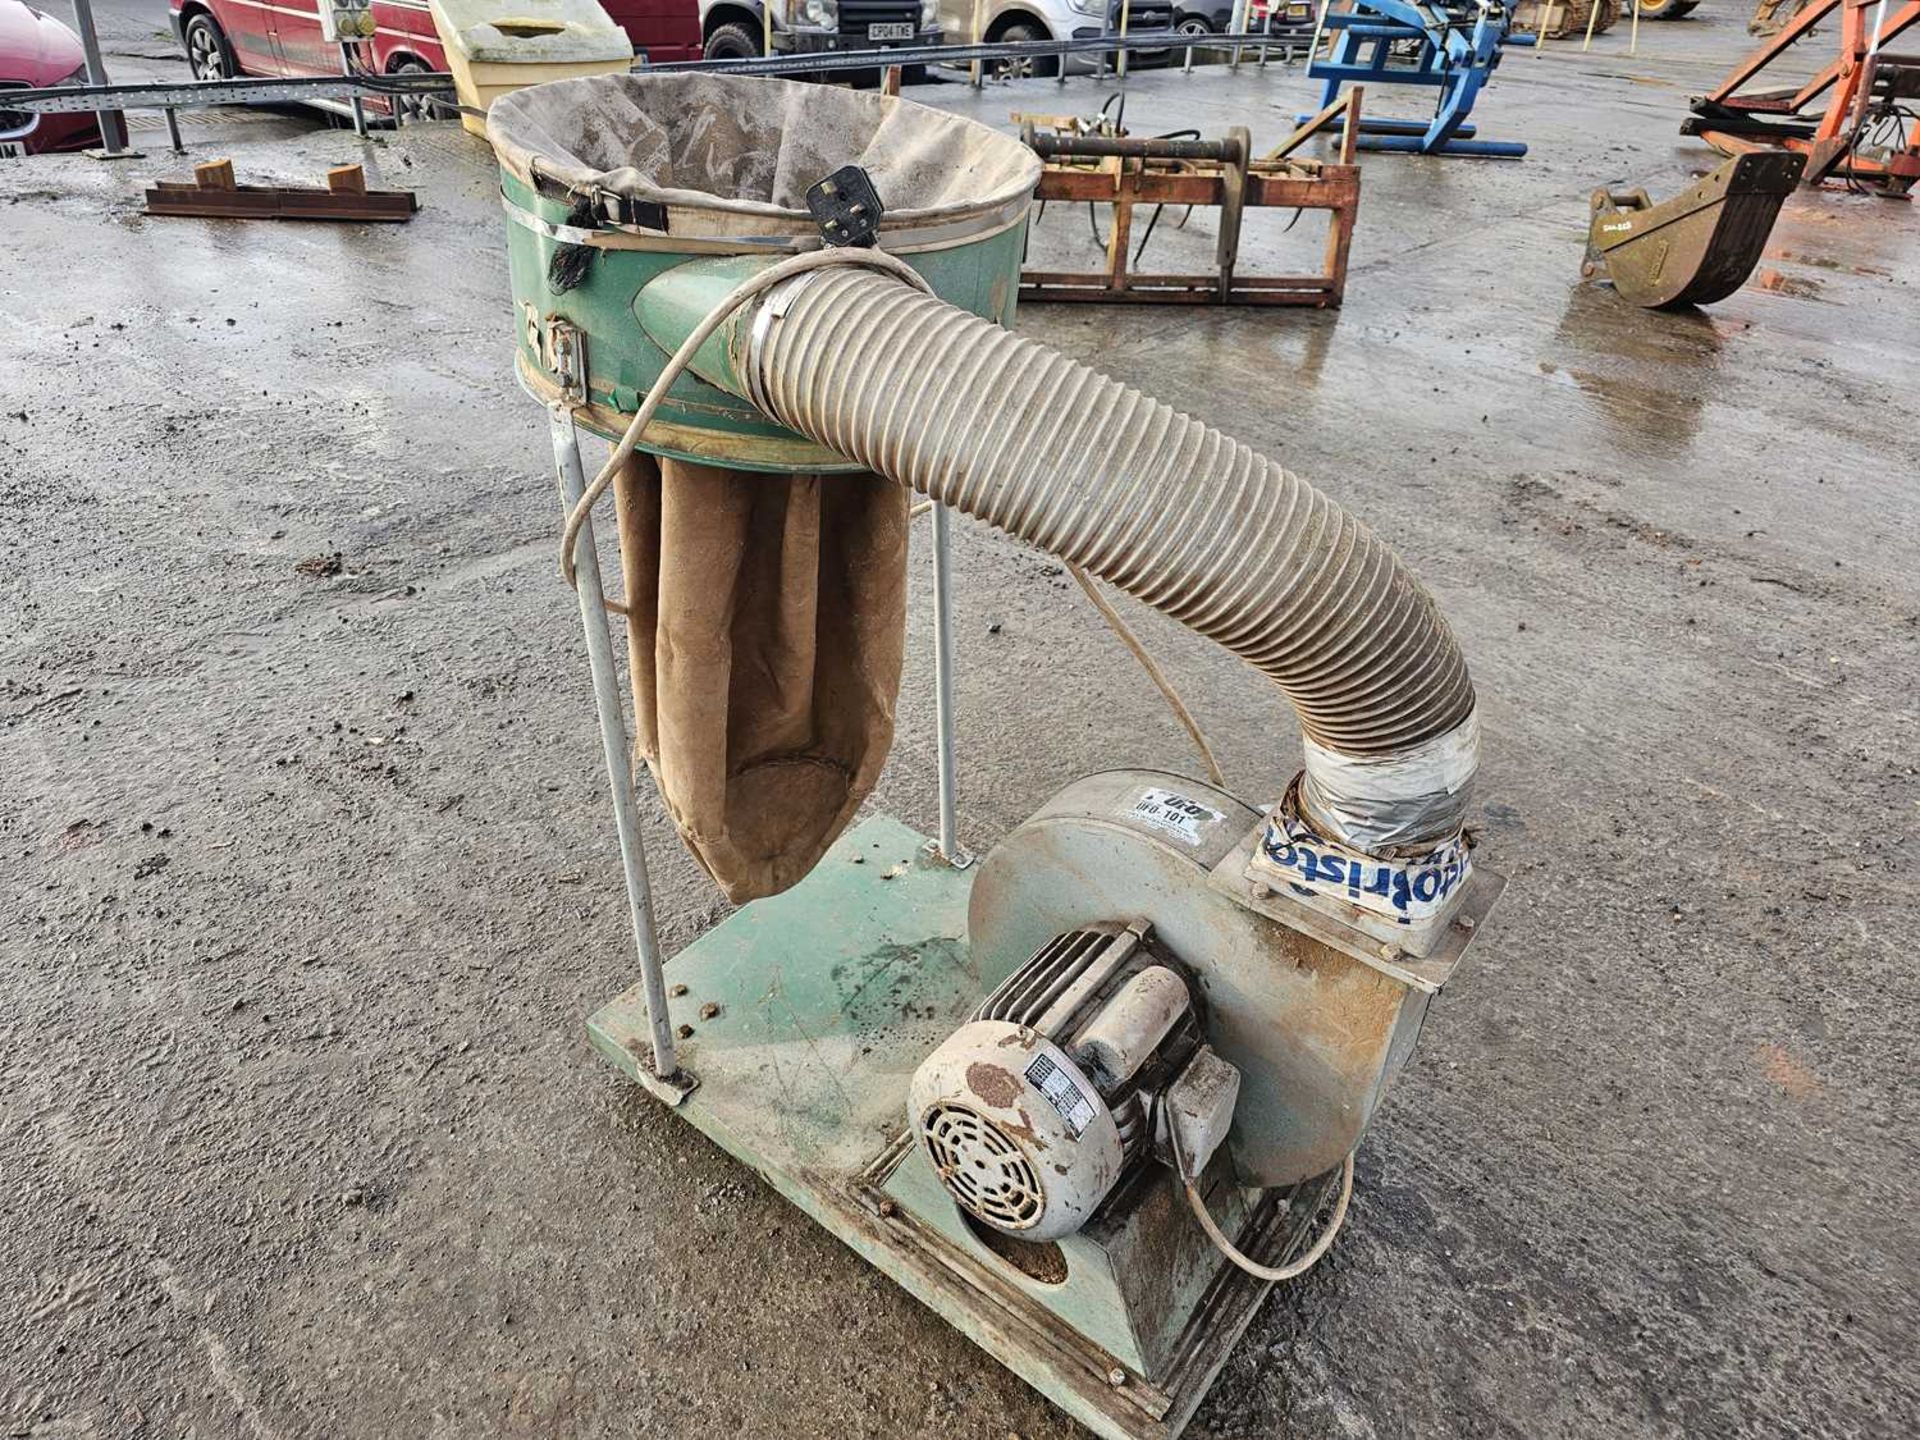 Rexma UFO-101 240Volt Dust Collector